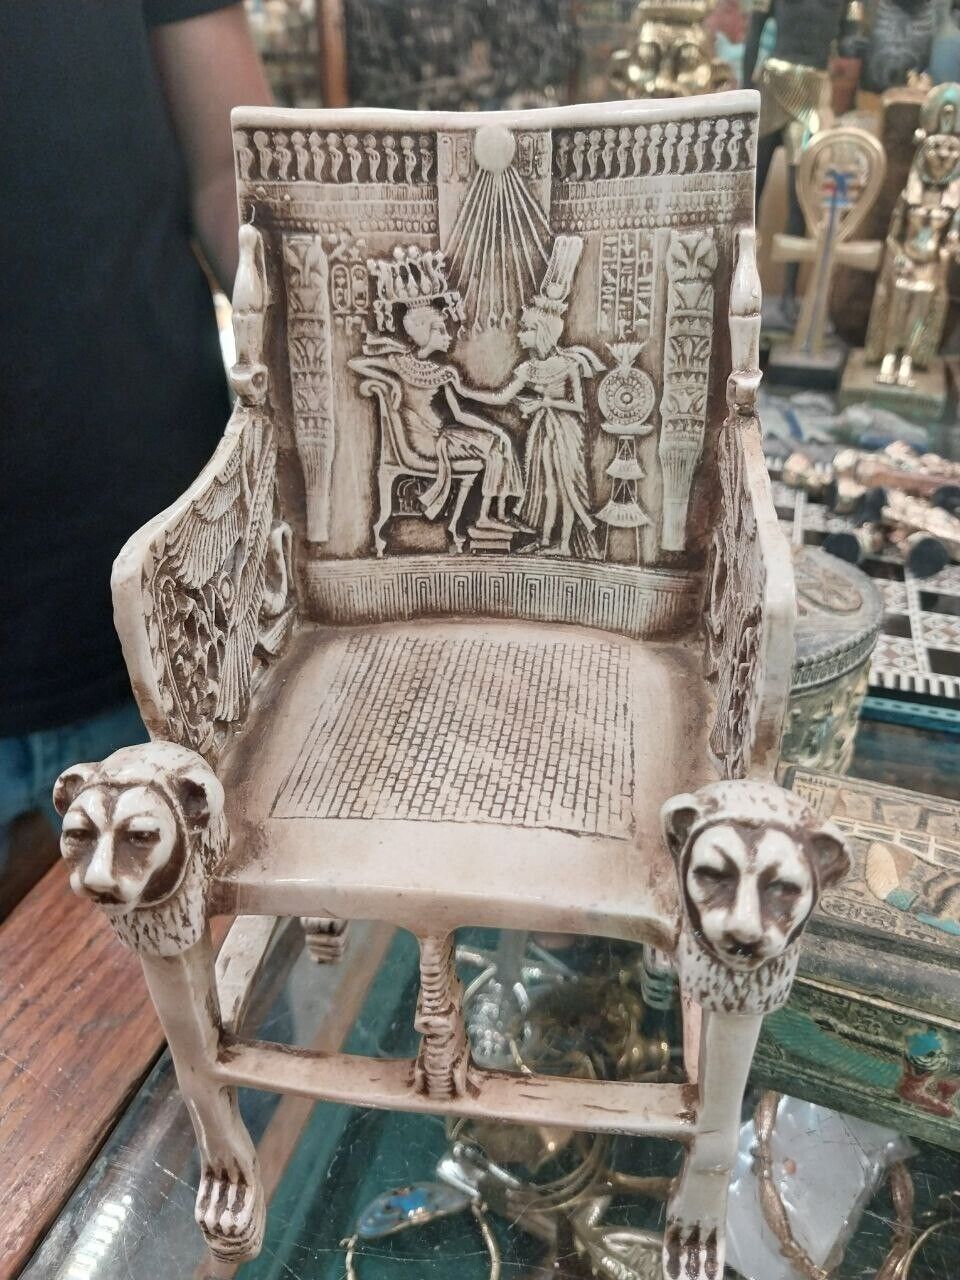 The Marble Throne Chair is a resin replica of the Egyptian Pharaoh King Tut Smal